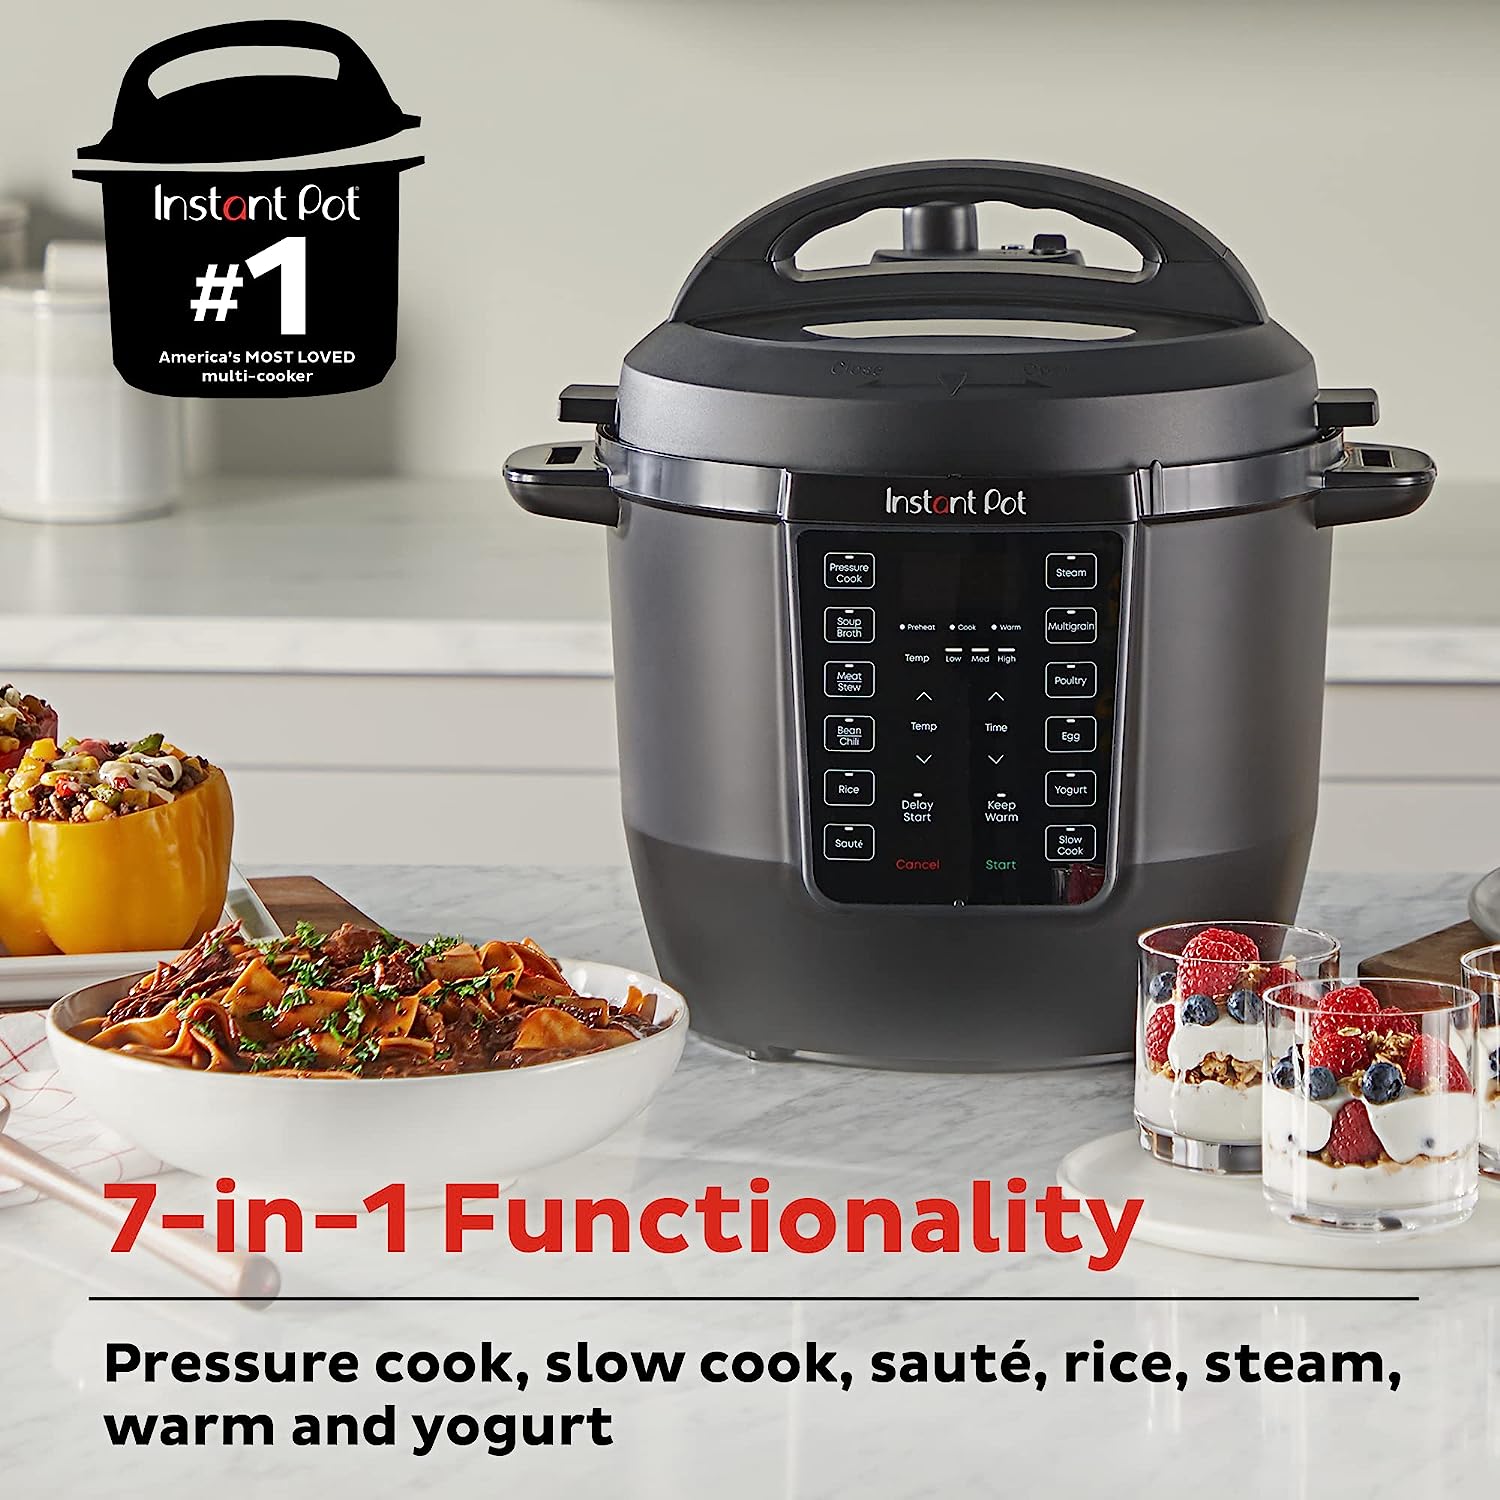 Instant Pot RIO, Formerly Known as Duo, 7-in-1 Electric Multi-Cooker,  Pressure Cooker, Slow Cooker, Rice Cooker, Steamer, Sauté, Yogurt Maker, &  Warmer, Includes App With Over 800 Recipes, 6 Quart